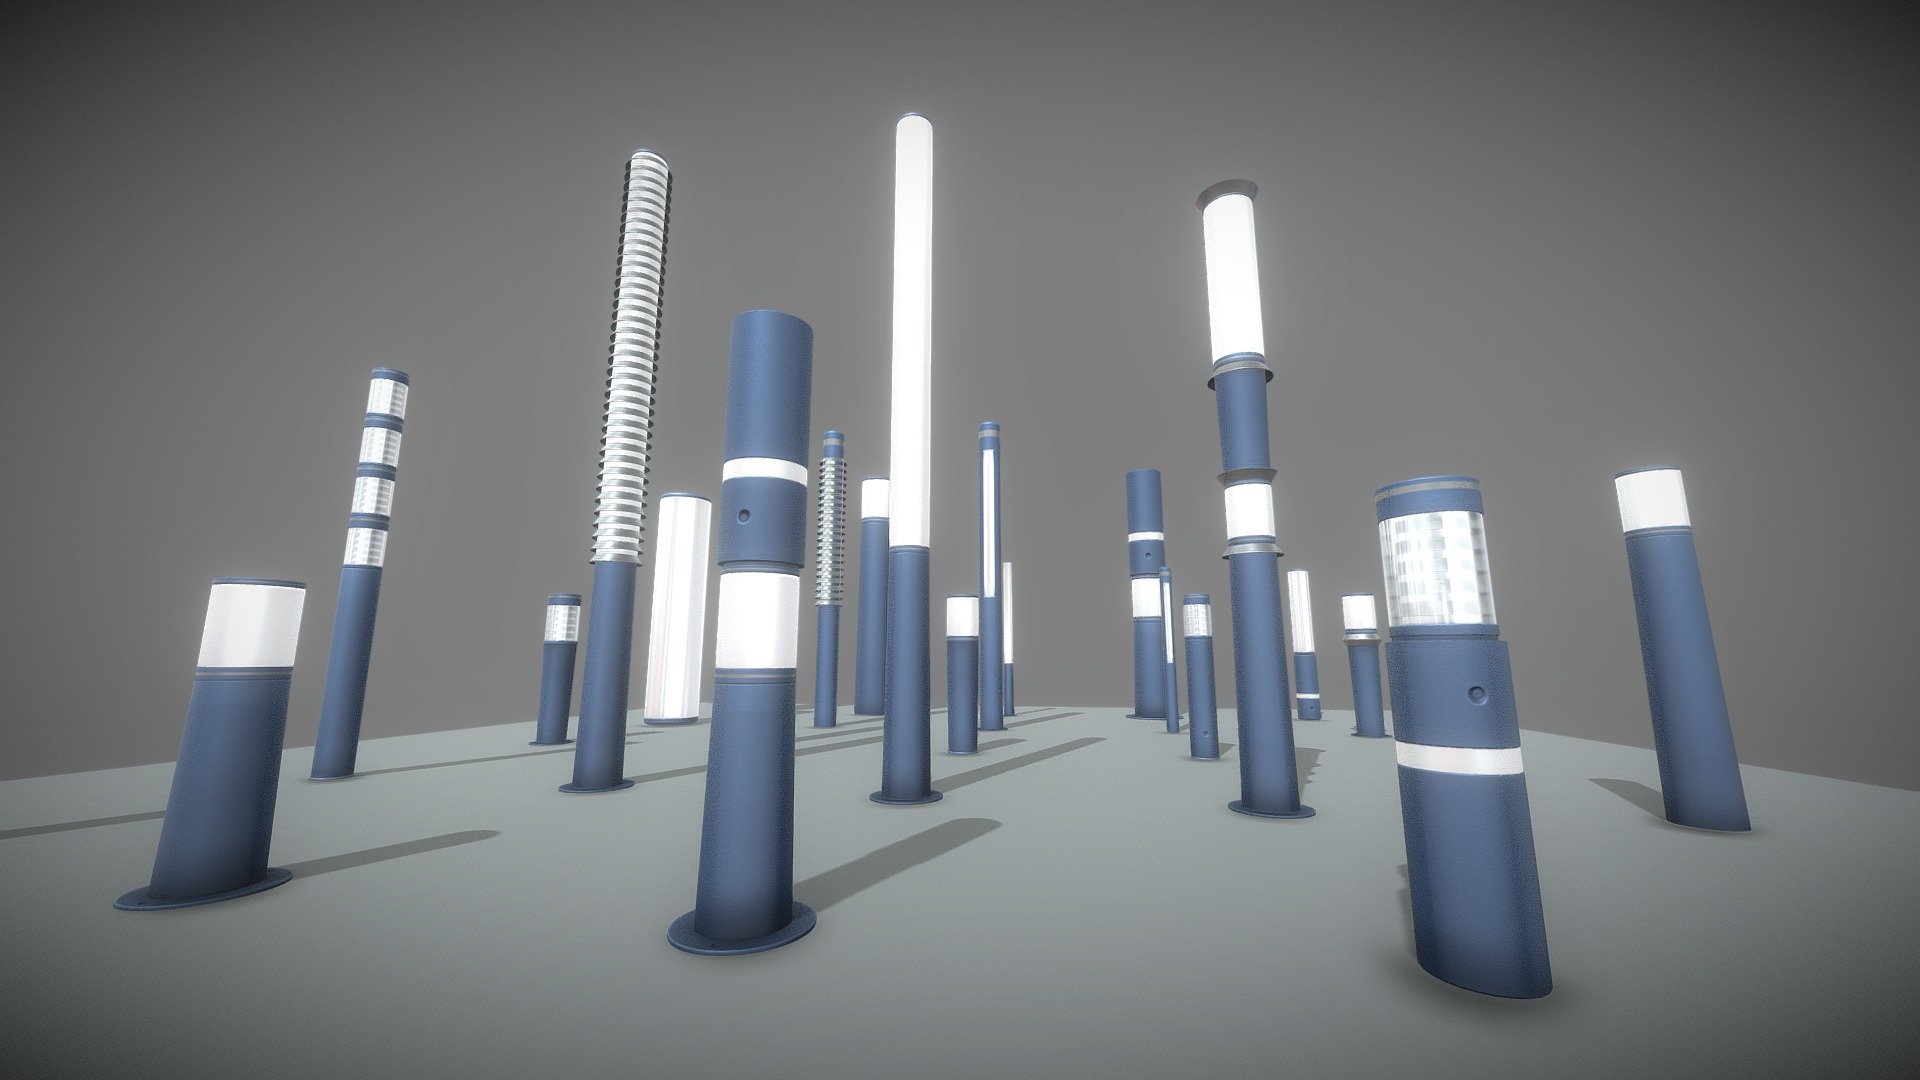 Here are 30 different types of low-poly light columns.
The blue version!




High-Poly Version (Total triangles 153.7k)

Street Light (9) Light Columns Basic (Low-Poly)

Street Light (9) Light Columns Moss Green

**Here are some other street lights: **




Street Light (1) Station Clock (High-Poly)

Street Light (2) Wall-Version (High-Poly)

Street Light (3) (Low-Poly Version)

Street Light (4) (High-Poly Version)

Street Light (5) High-Poly Version 

Street Light (7) (Basic Low-Poly Version)

Street Light (8) Light Bollard Basic



Modeled and textured by 3DHaupt in Blender-3D - Street Light (9) Light Columns Blue (Low-Poly) - Buy Royalty Free 3D model by VIS-All-3D (@VIS-All) 3d model